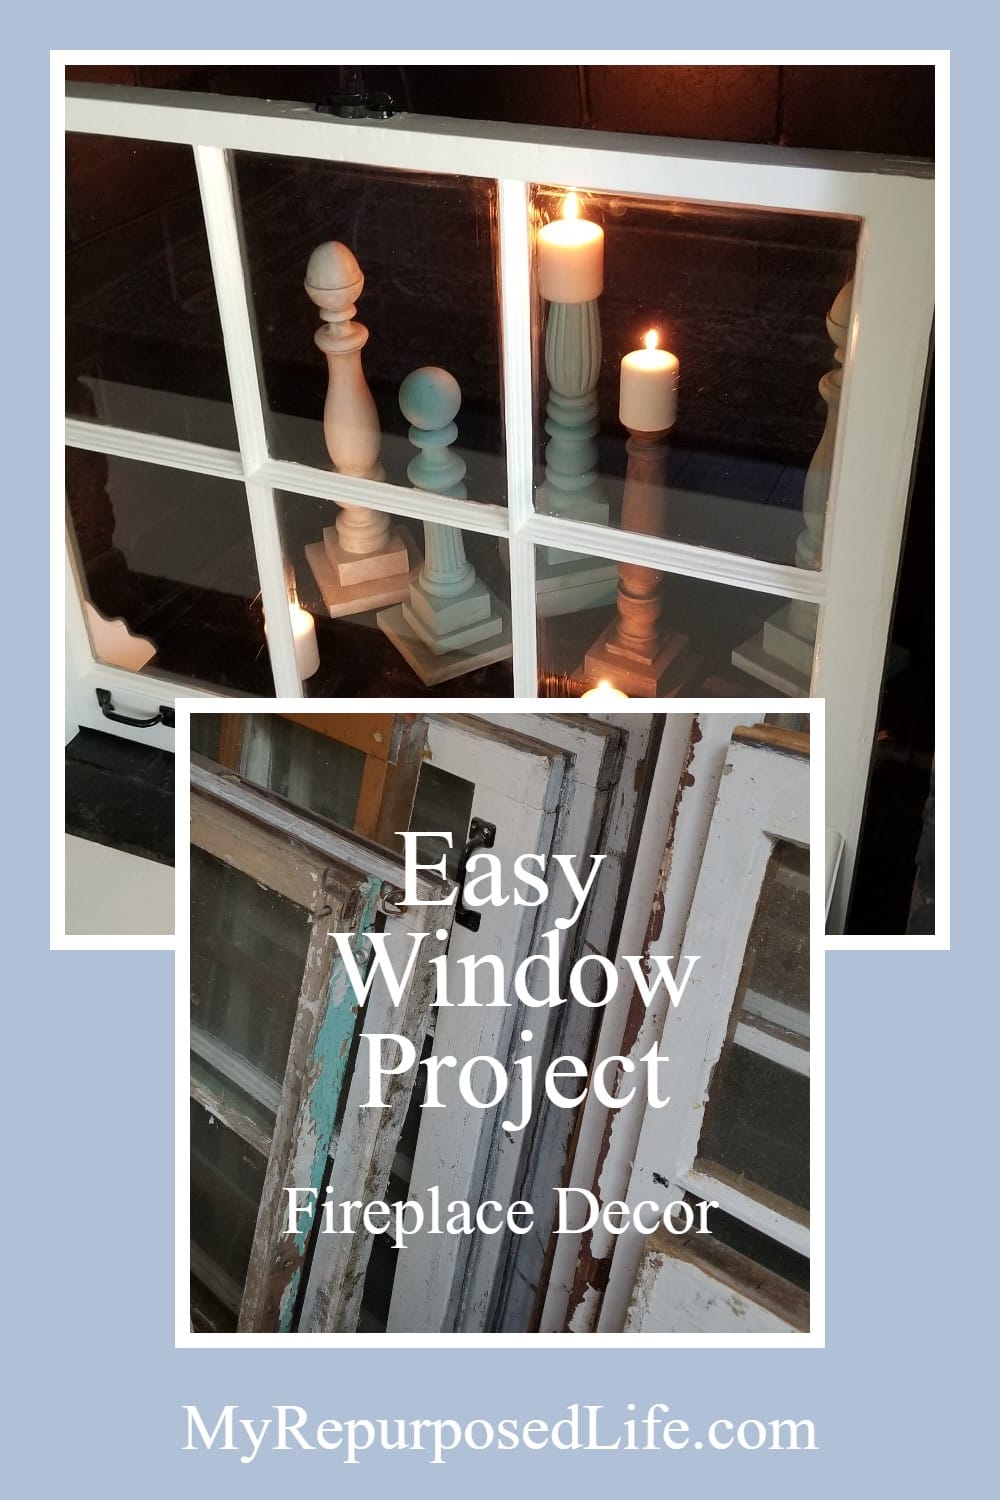 How to make a custom fireplace screen out of an old window. Easy project with step by step directions. This fireplace decor is for when you're not using your fireplace or if it is a non-working fireplace. #MyRepurposedLife #easy #window #project #fireplace via @repurposedlife